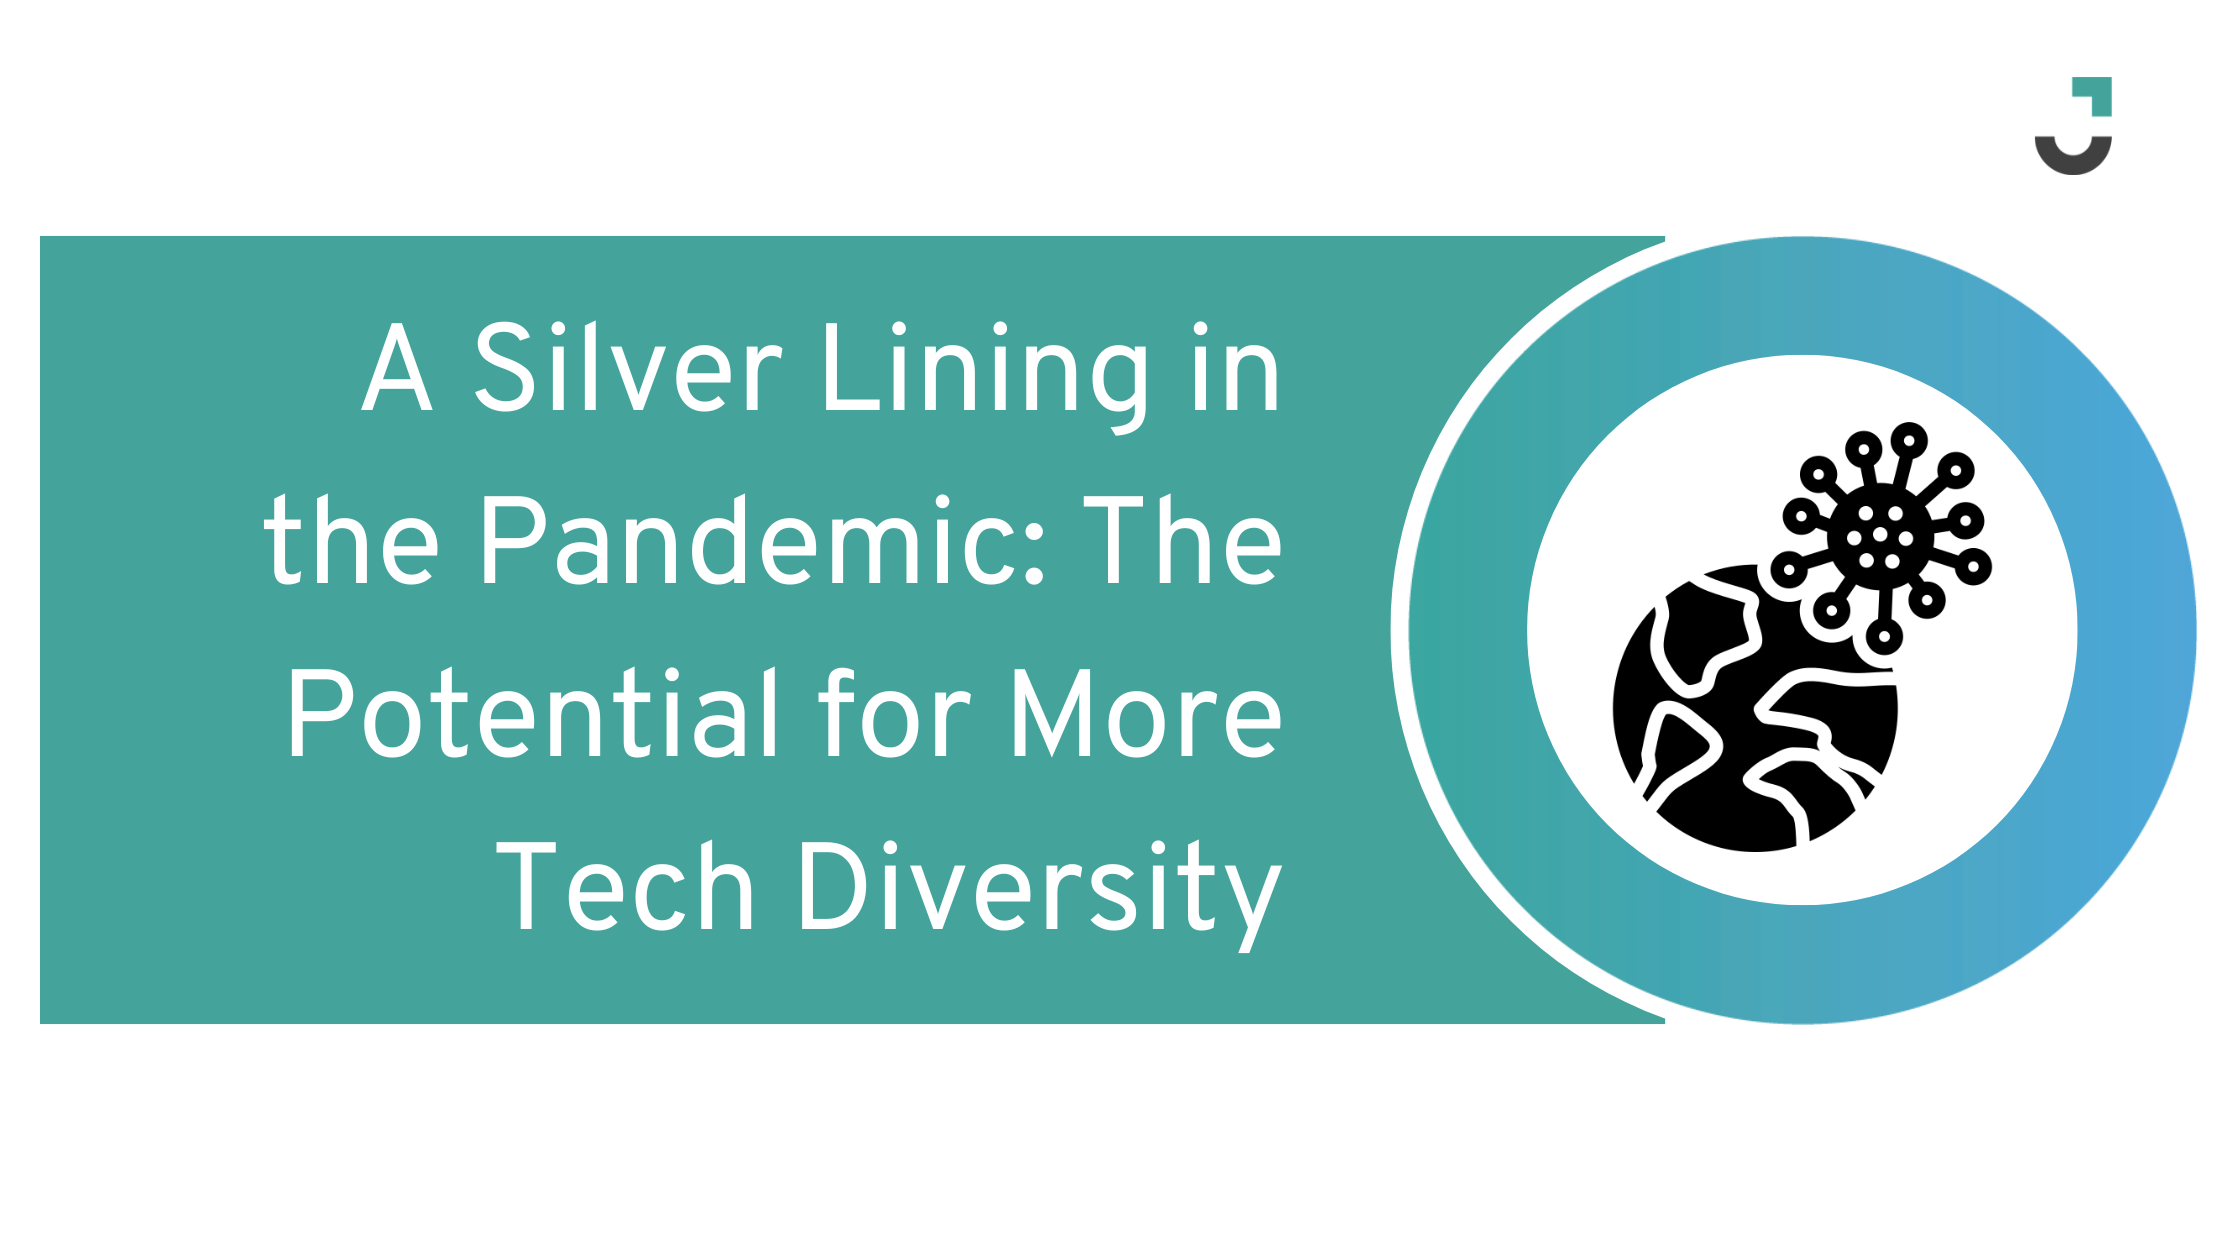 A Silver Lining in the Pandemic: The Potential for More Tech Diversity